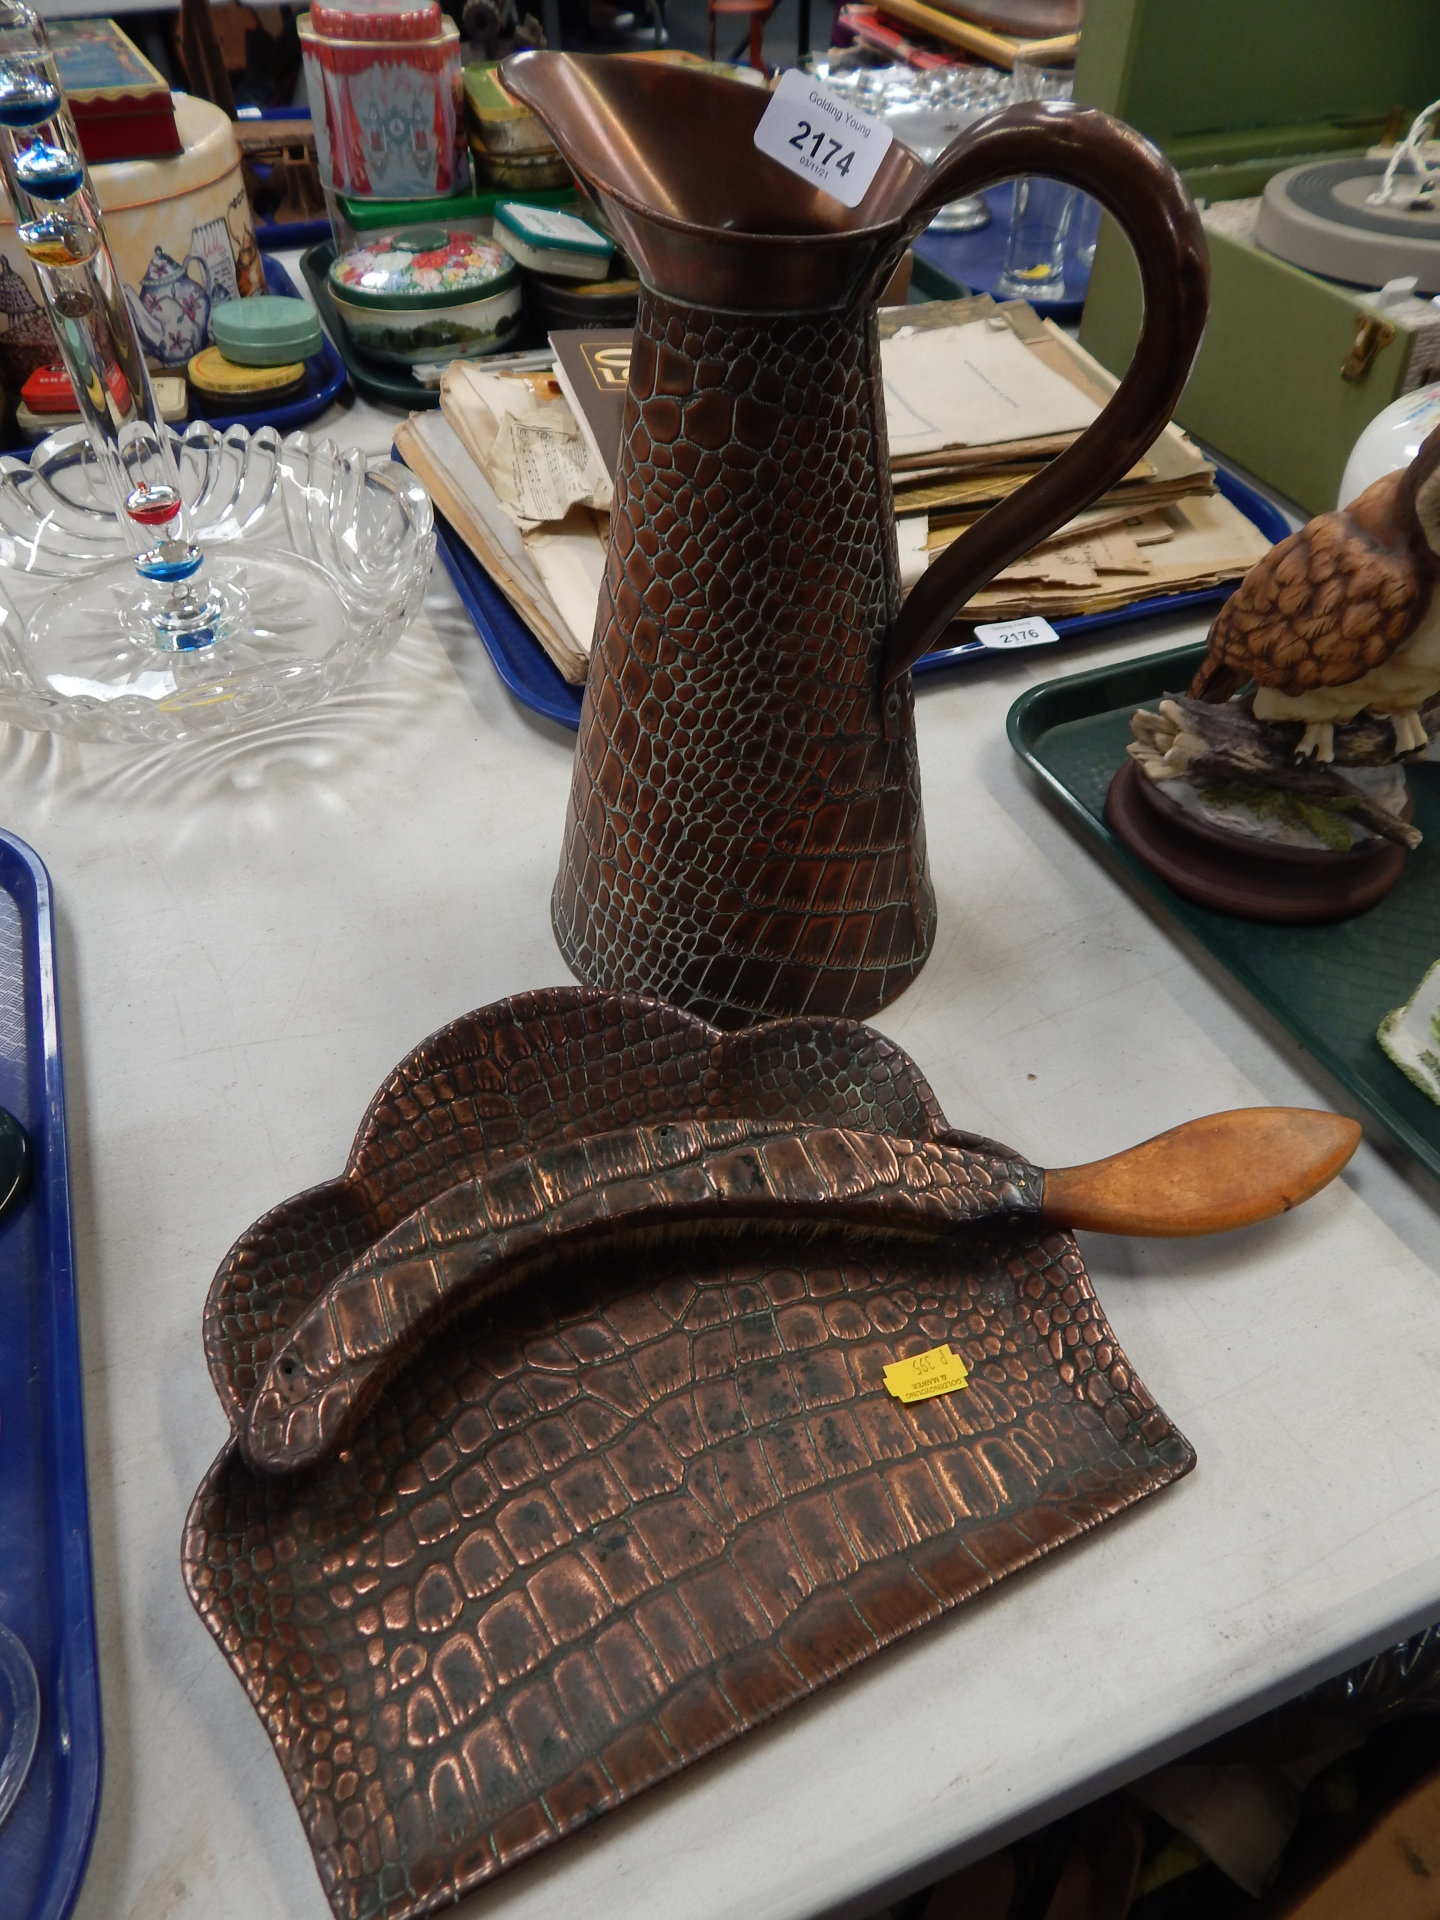 A hammered copper water jug, and crumb scoop, in crocodile skin type finish.